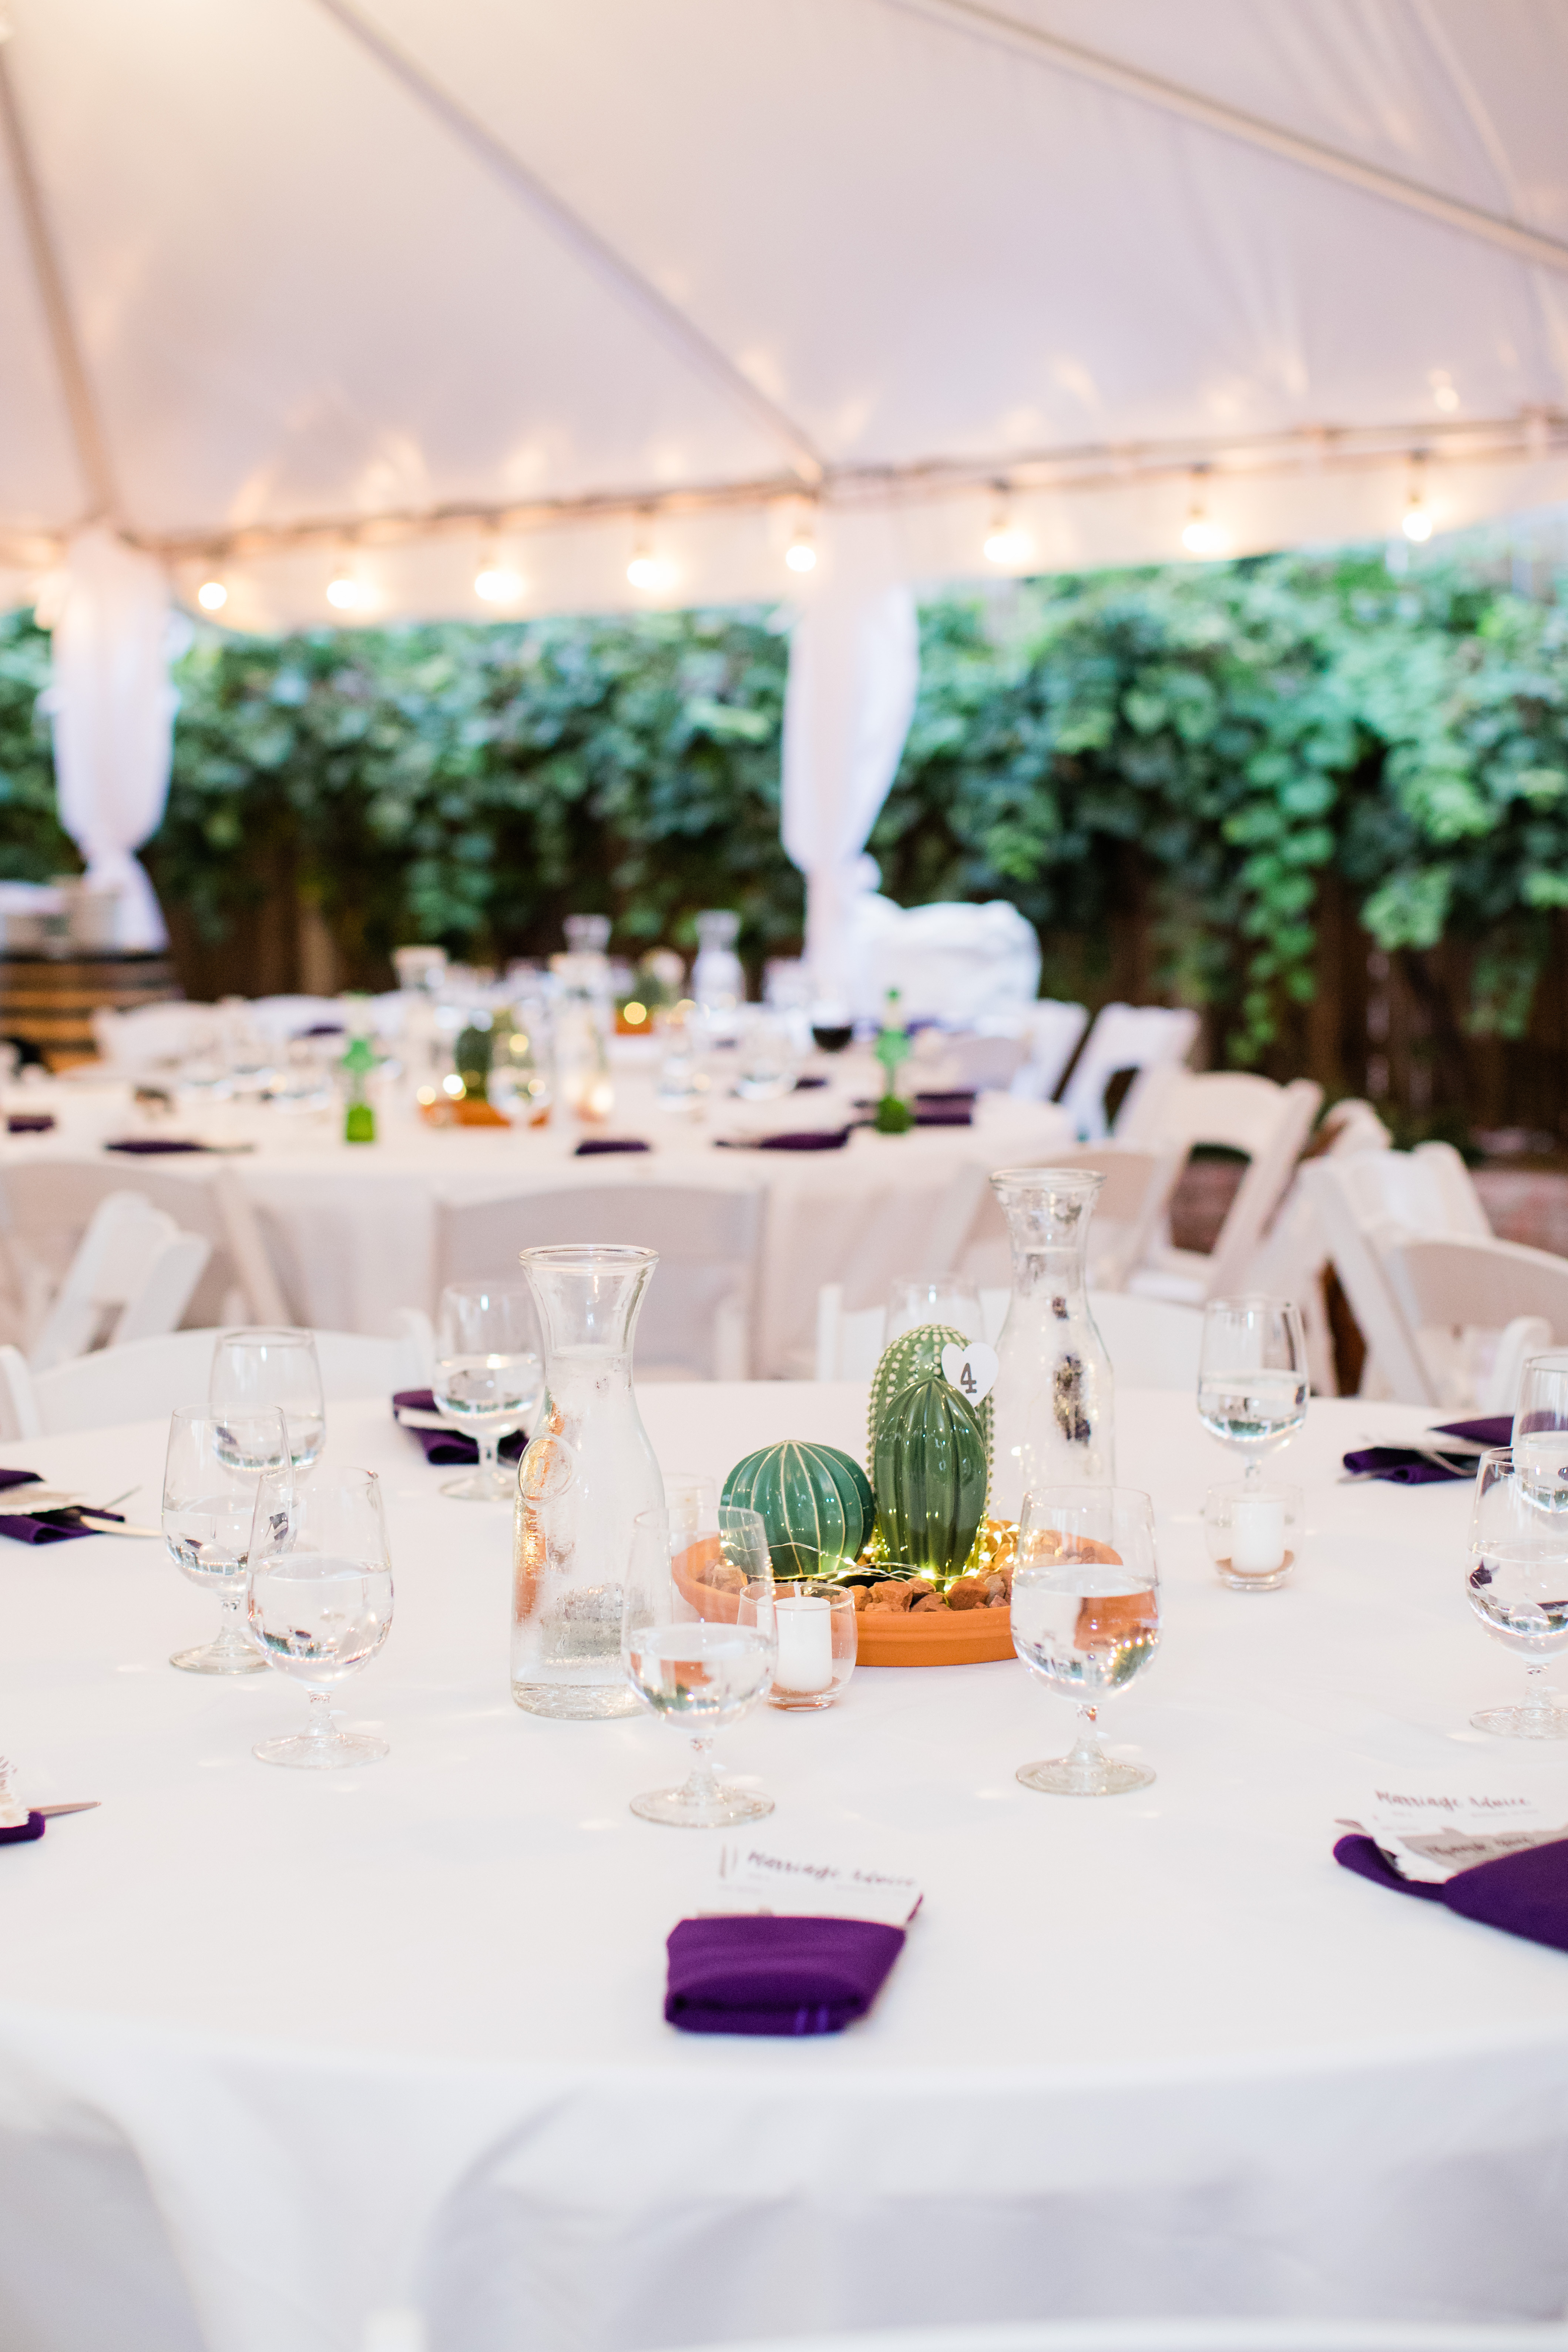 How to Host Your Fabulous Engagement Party